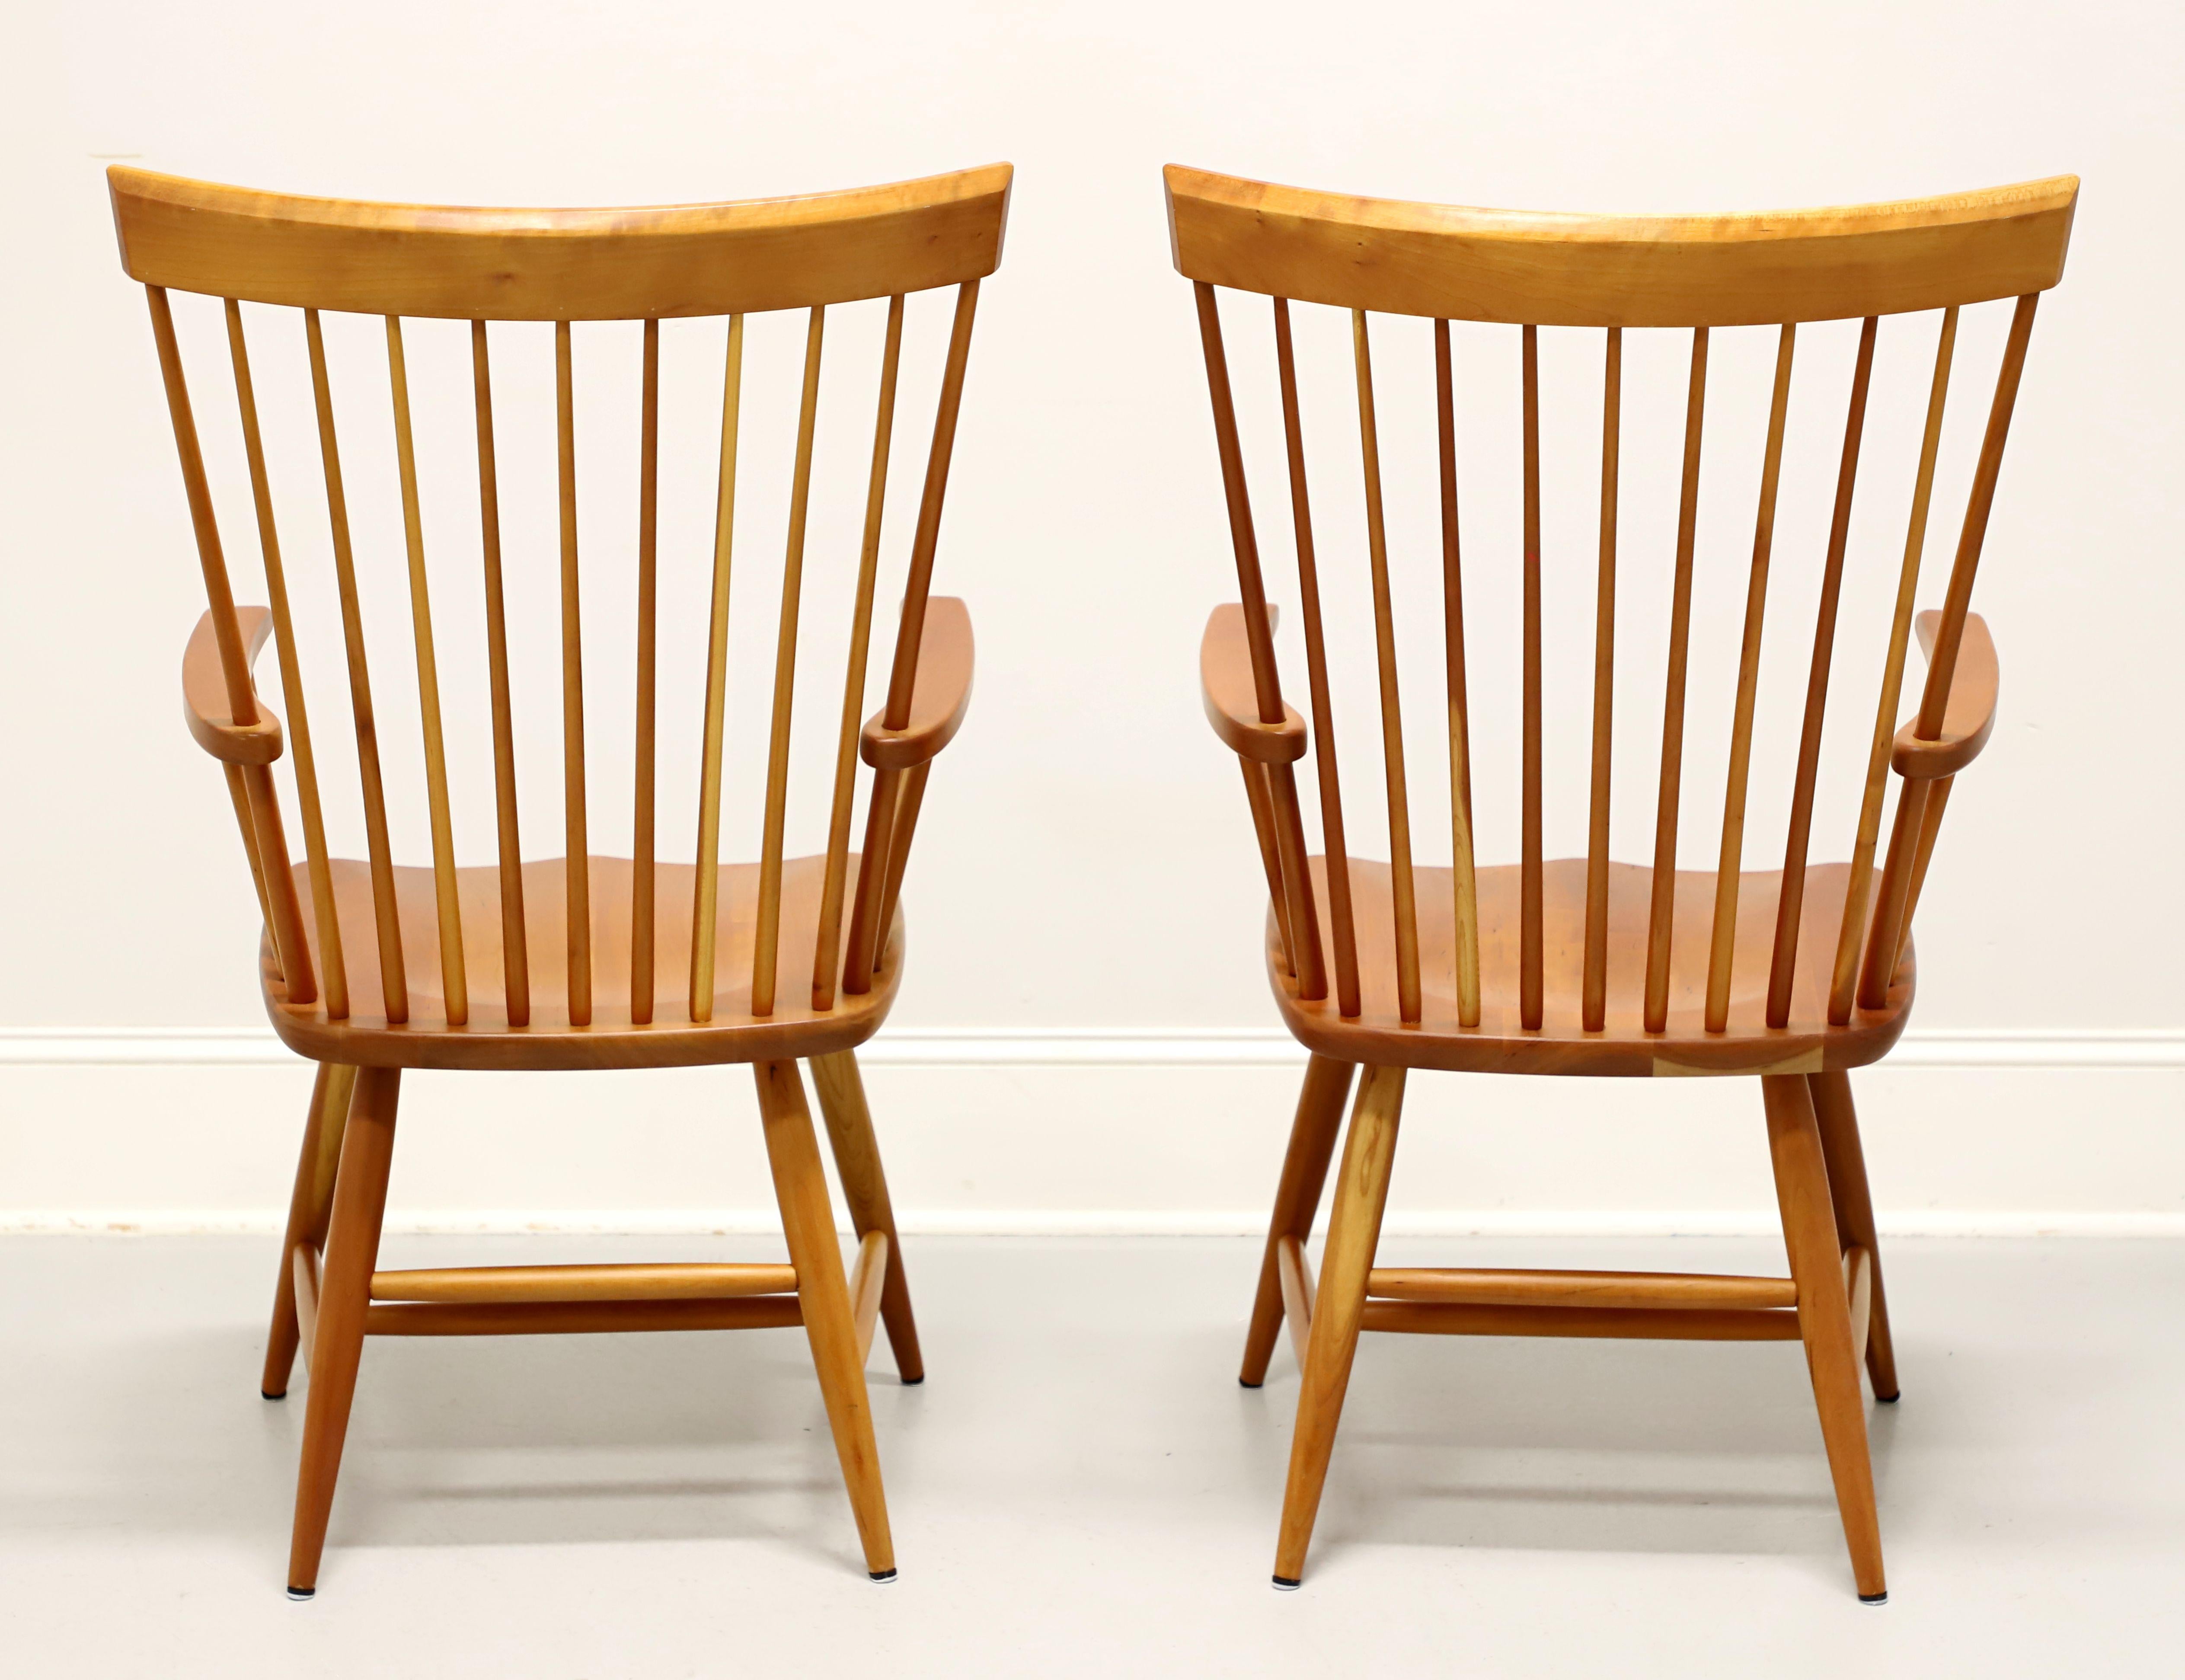 POMPASOONUC MILLS Mason Solid Cherry Dining Armchairs - Pair In Good Condition For Sale In Charlotte, NC